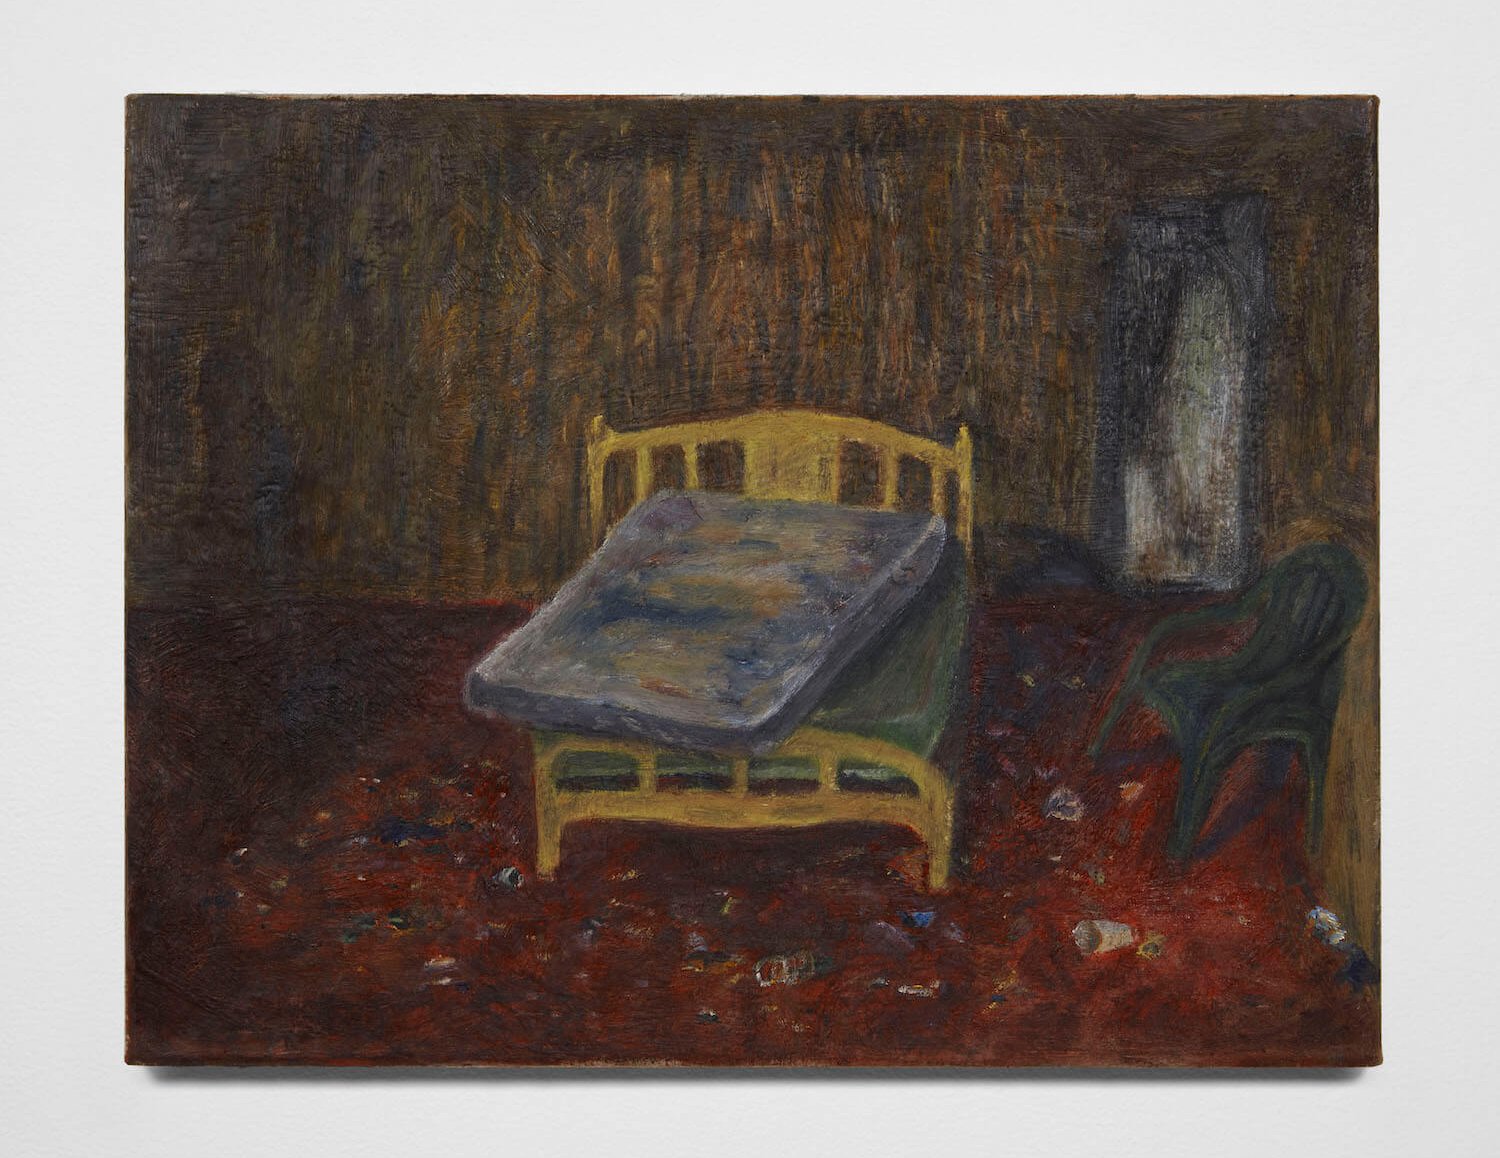 Lin, Coyote House (Red Room), 2020 (CL 20.030)